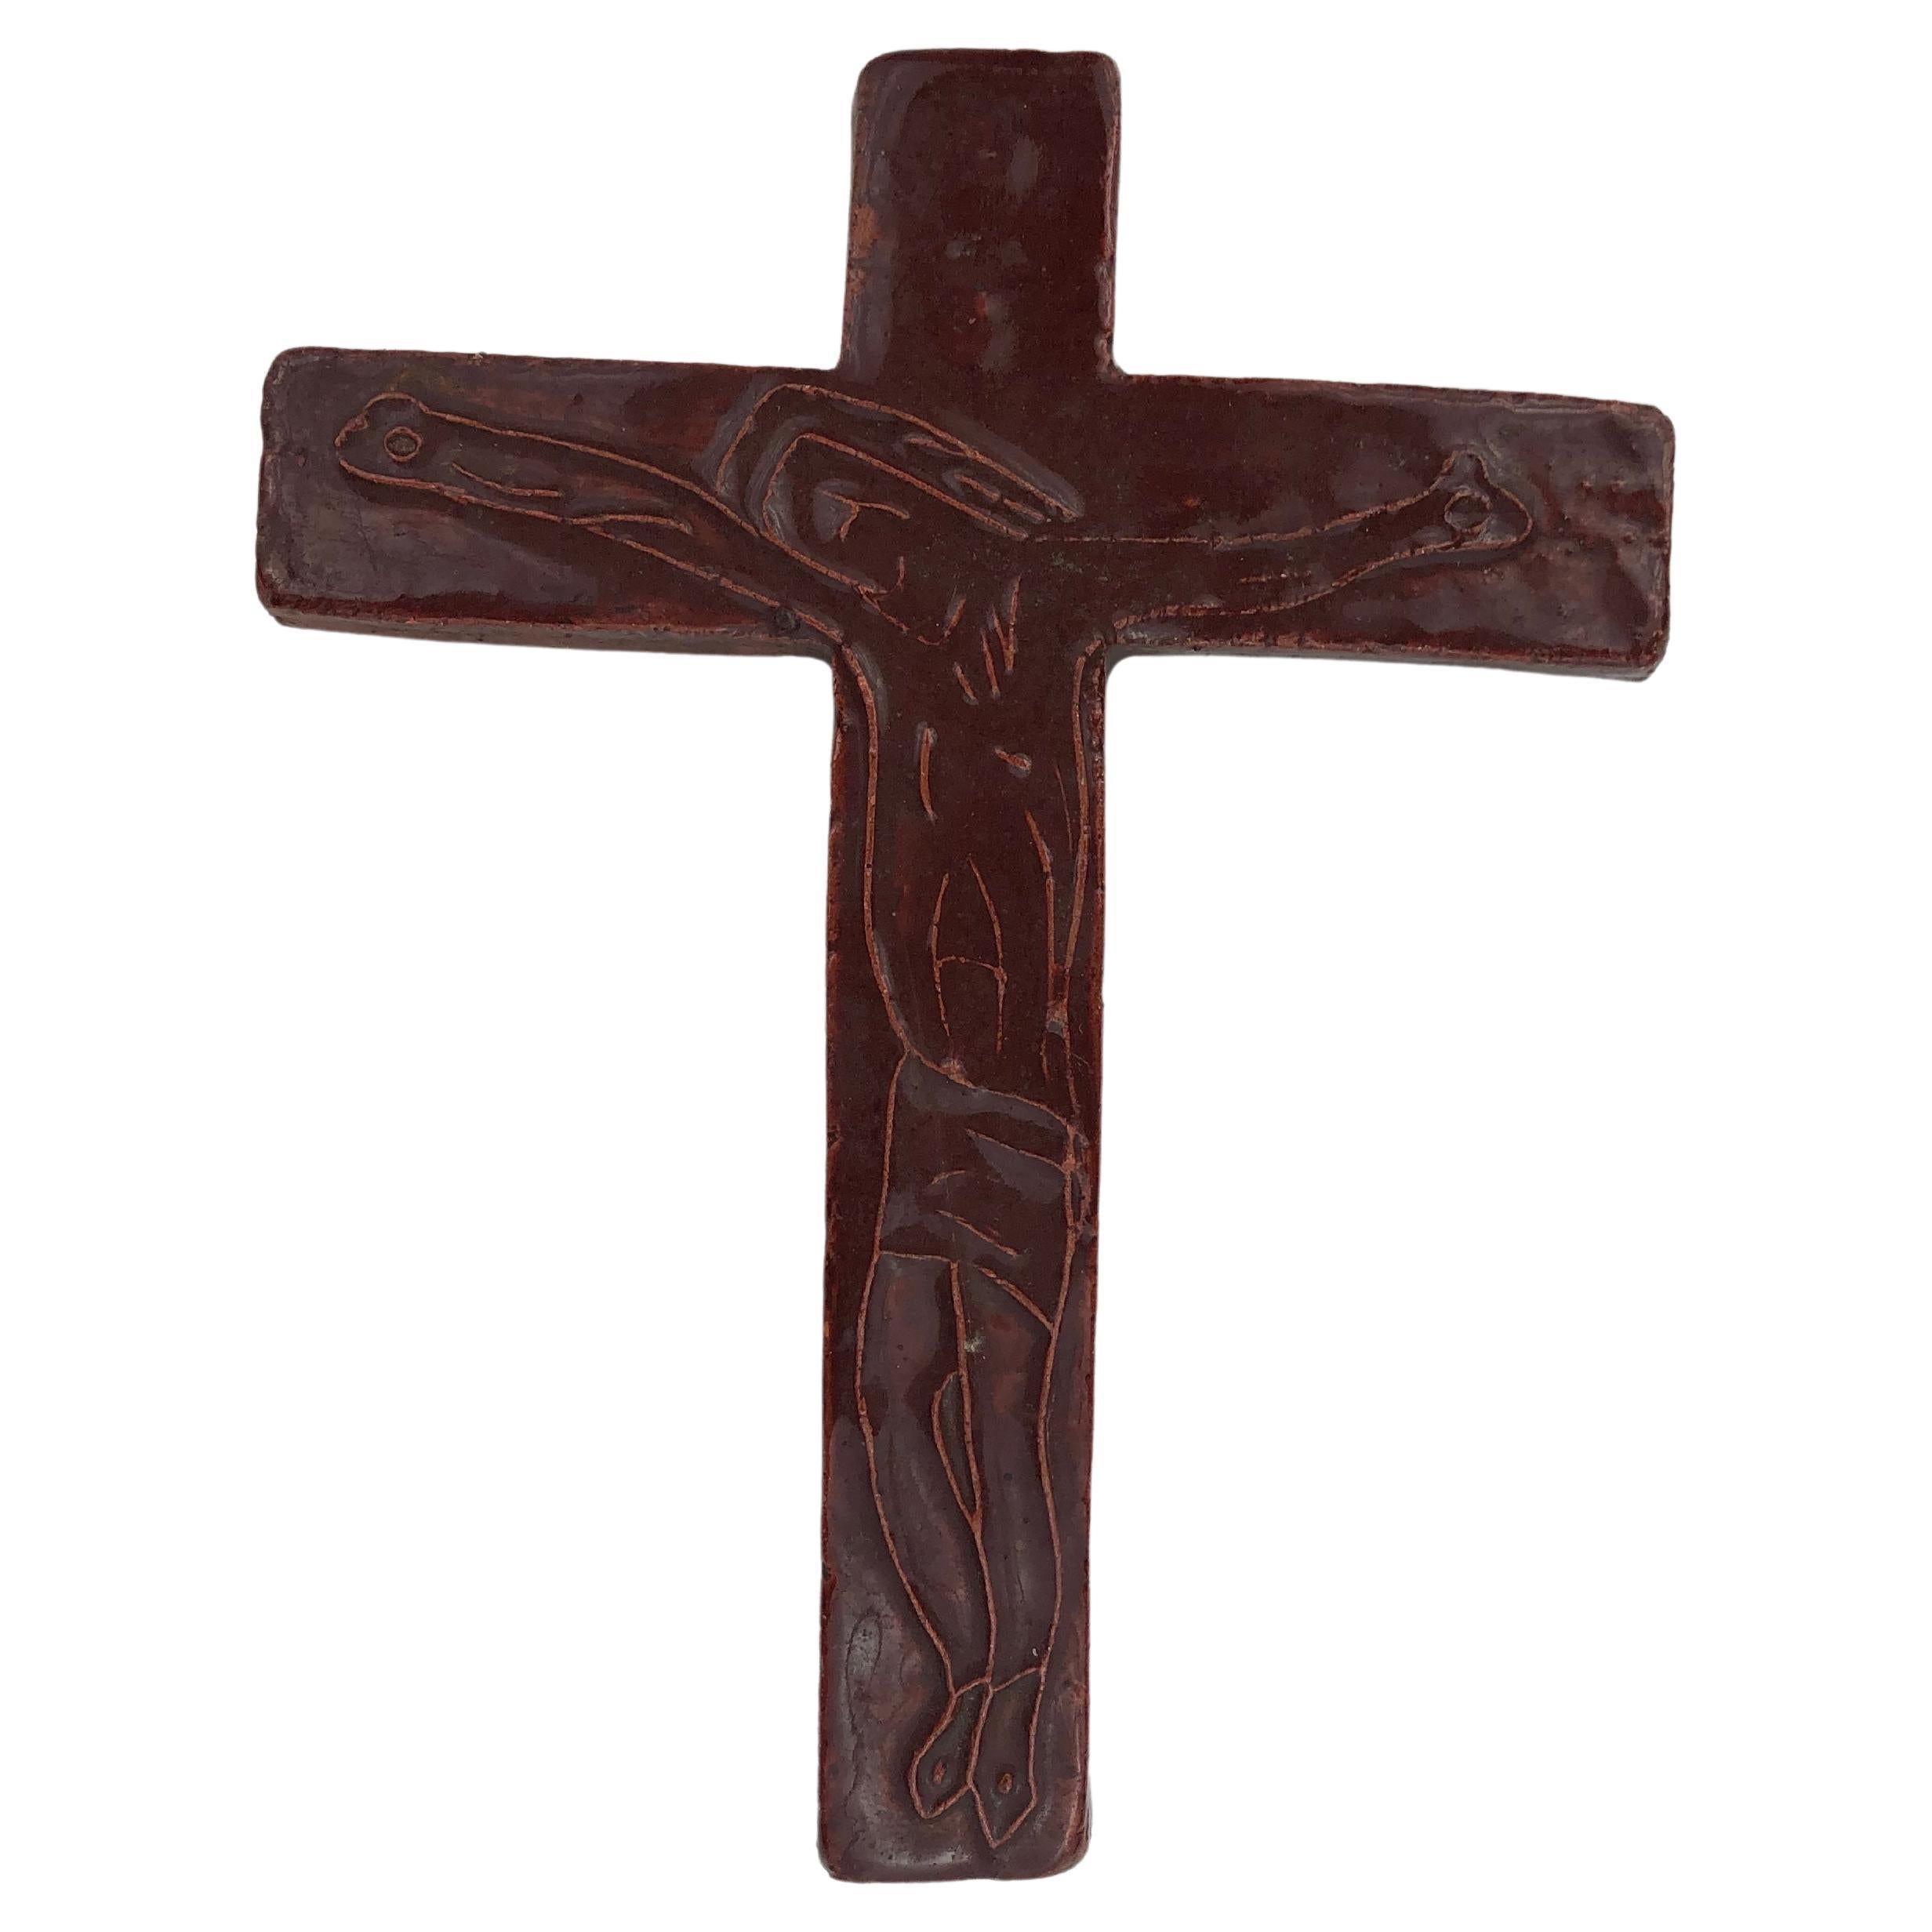 Handcrafted with meticulous attention to detail, this midcentury European ceramic cross has a rich red-brown gloss. At its center an abstract line drawing of a Christ figure is etched in relief. 

The design's core element is the line-drawn Christ